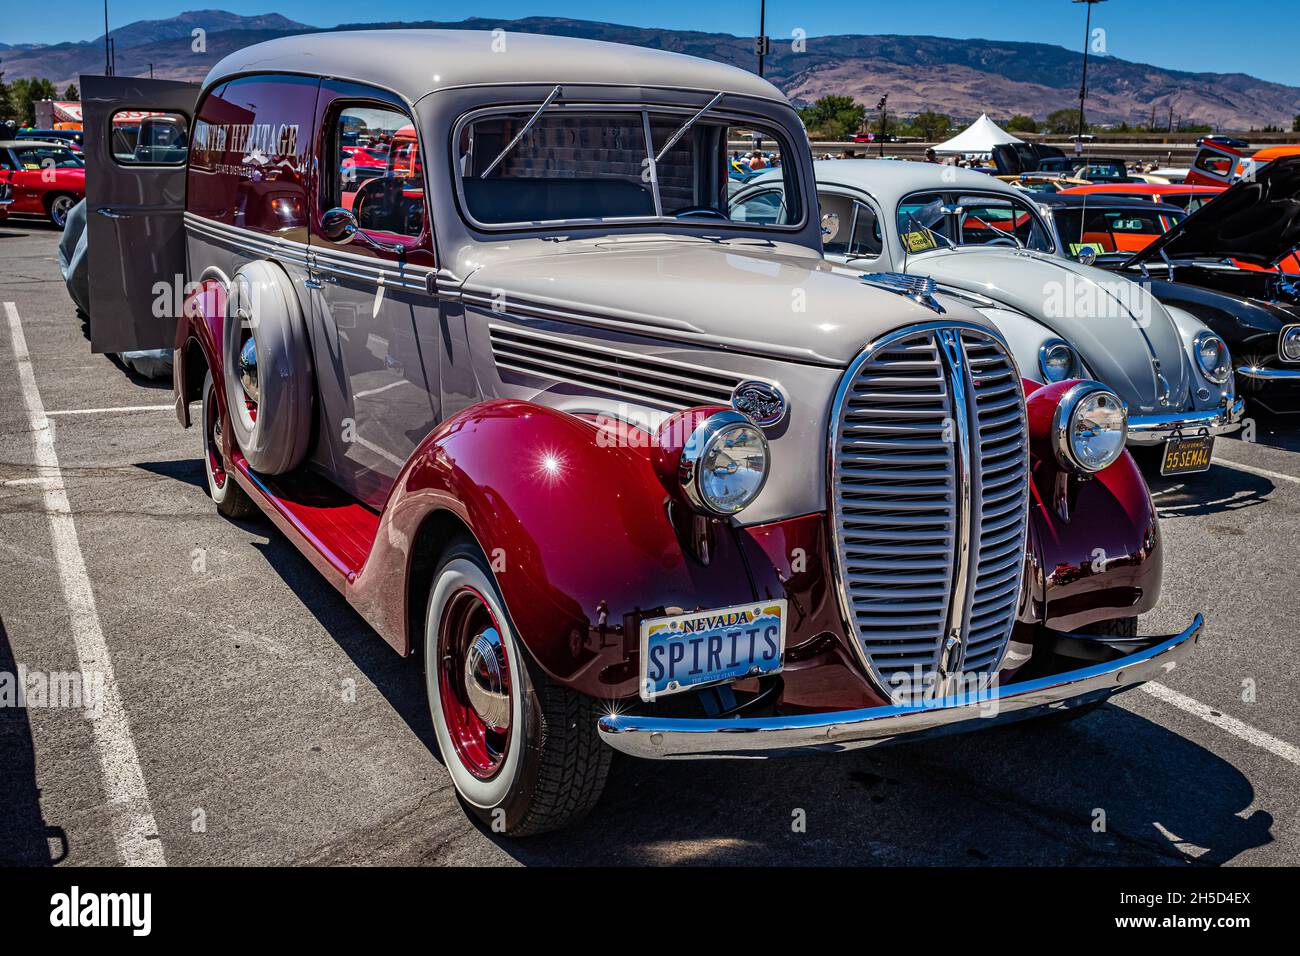 Reno, NV - August 5, 2021: 1938 Ford Panel Truck at a local car show. Stock Photo